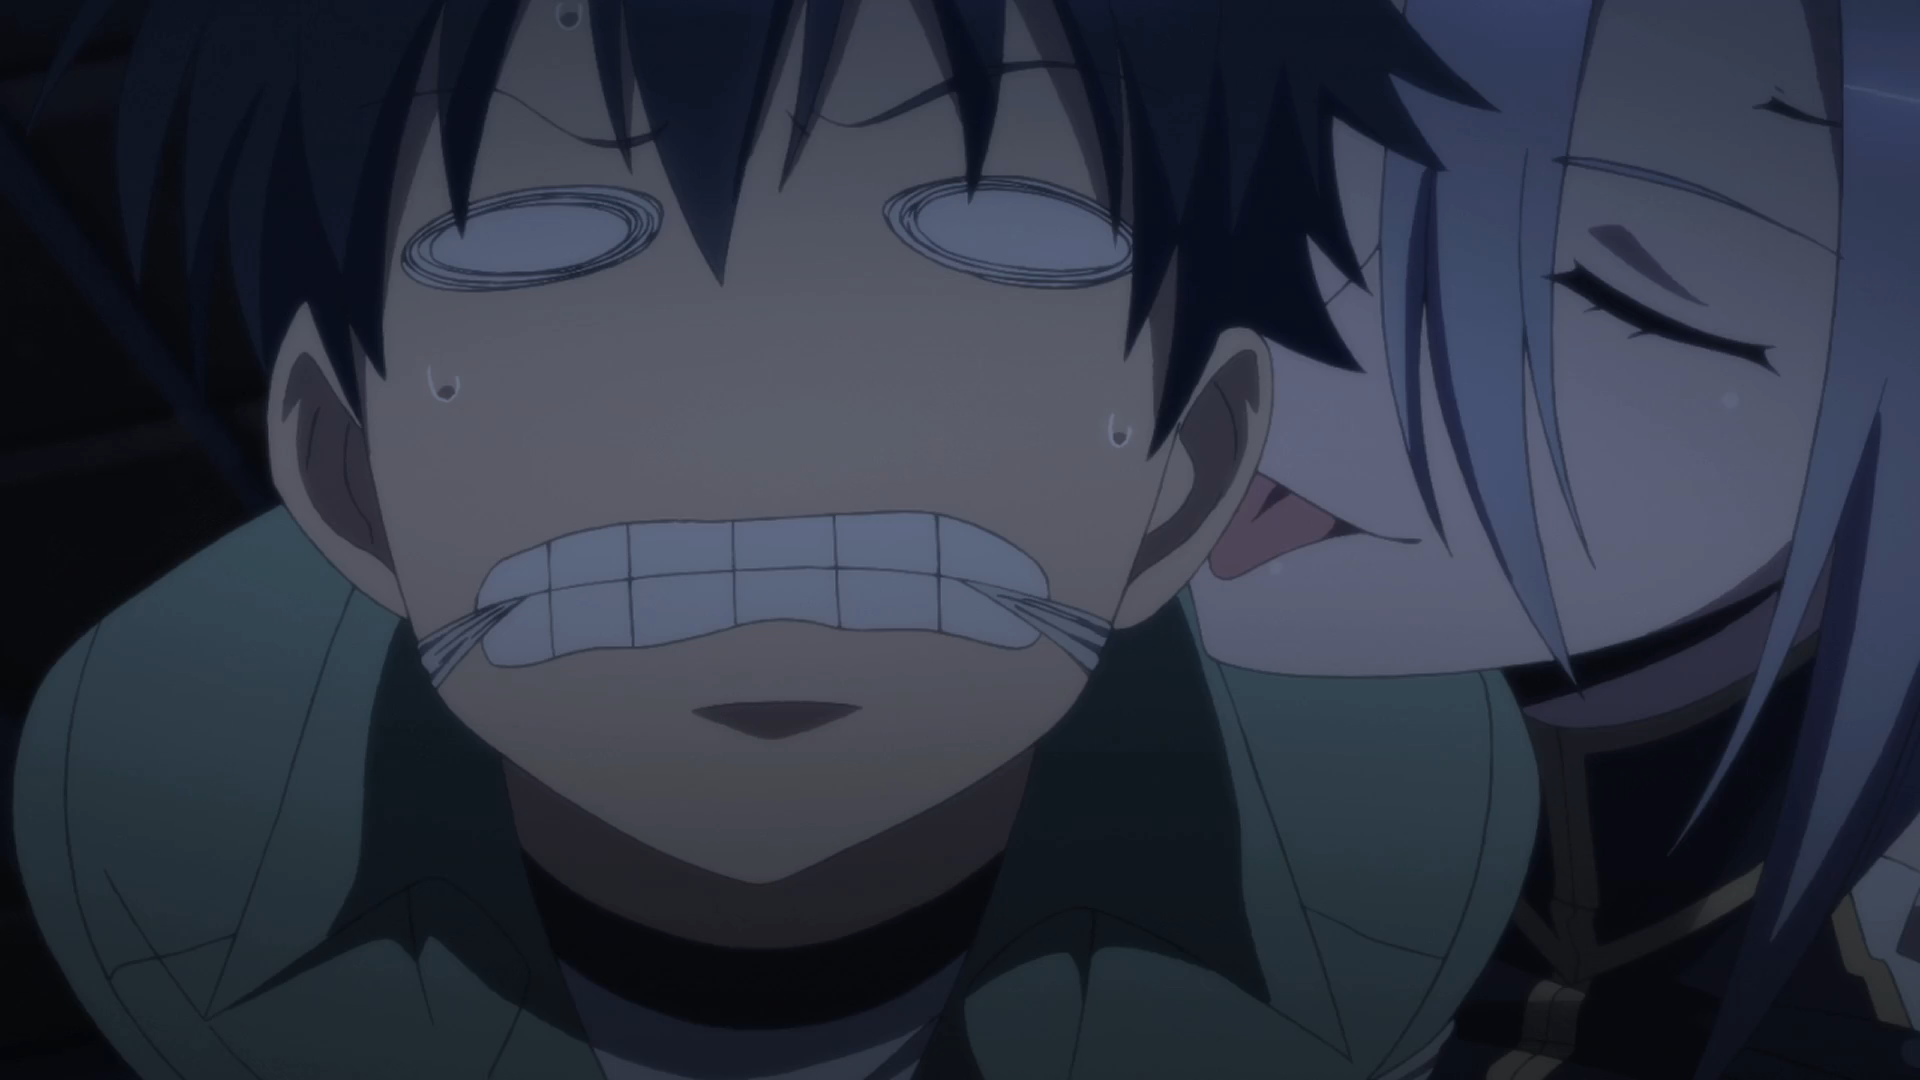 alexis bejarano recommends Monster Musume Episode 7